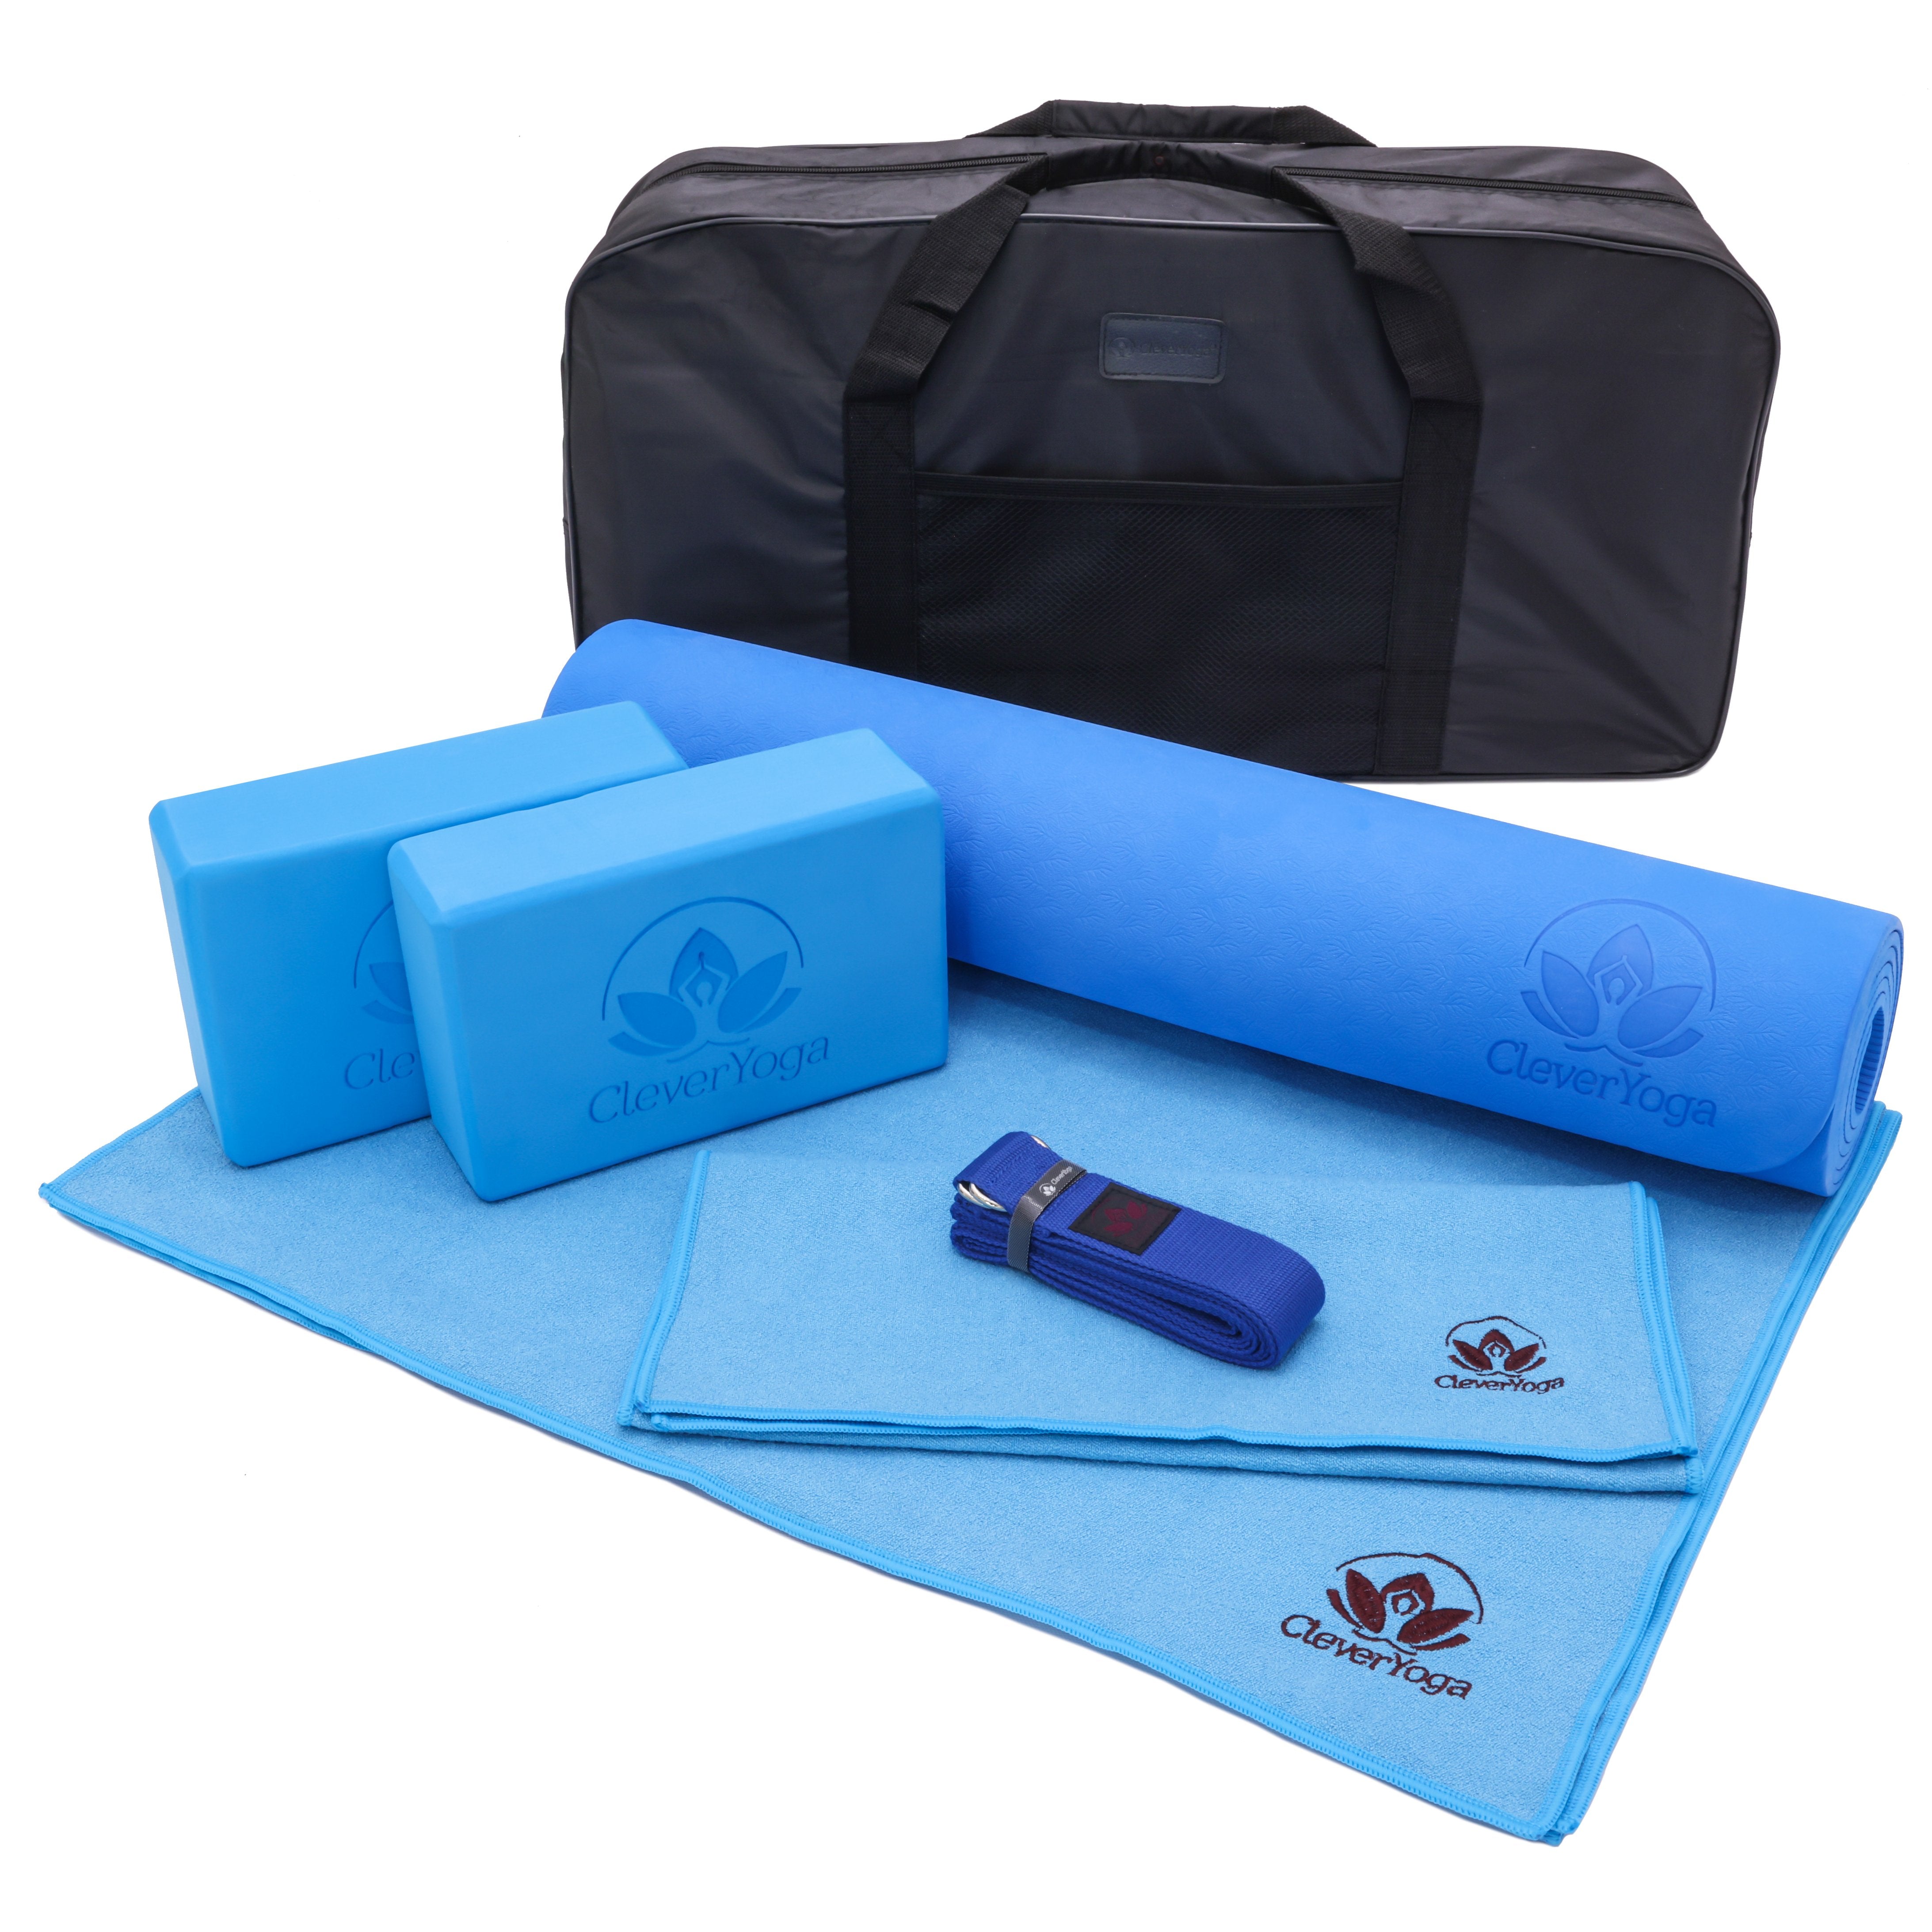  10 Pcs Yoga Starter Kit Include Yoga Mat with Carry